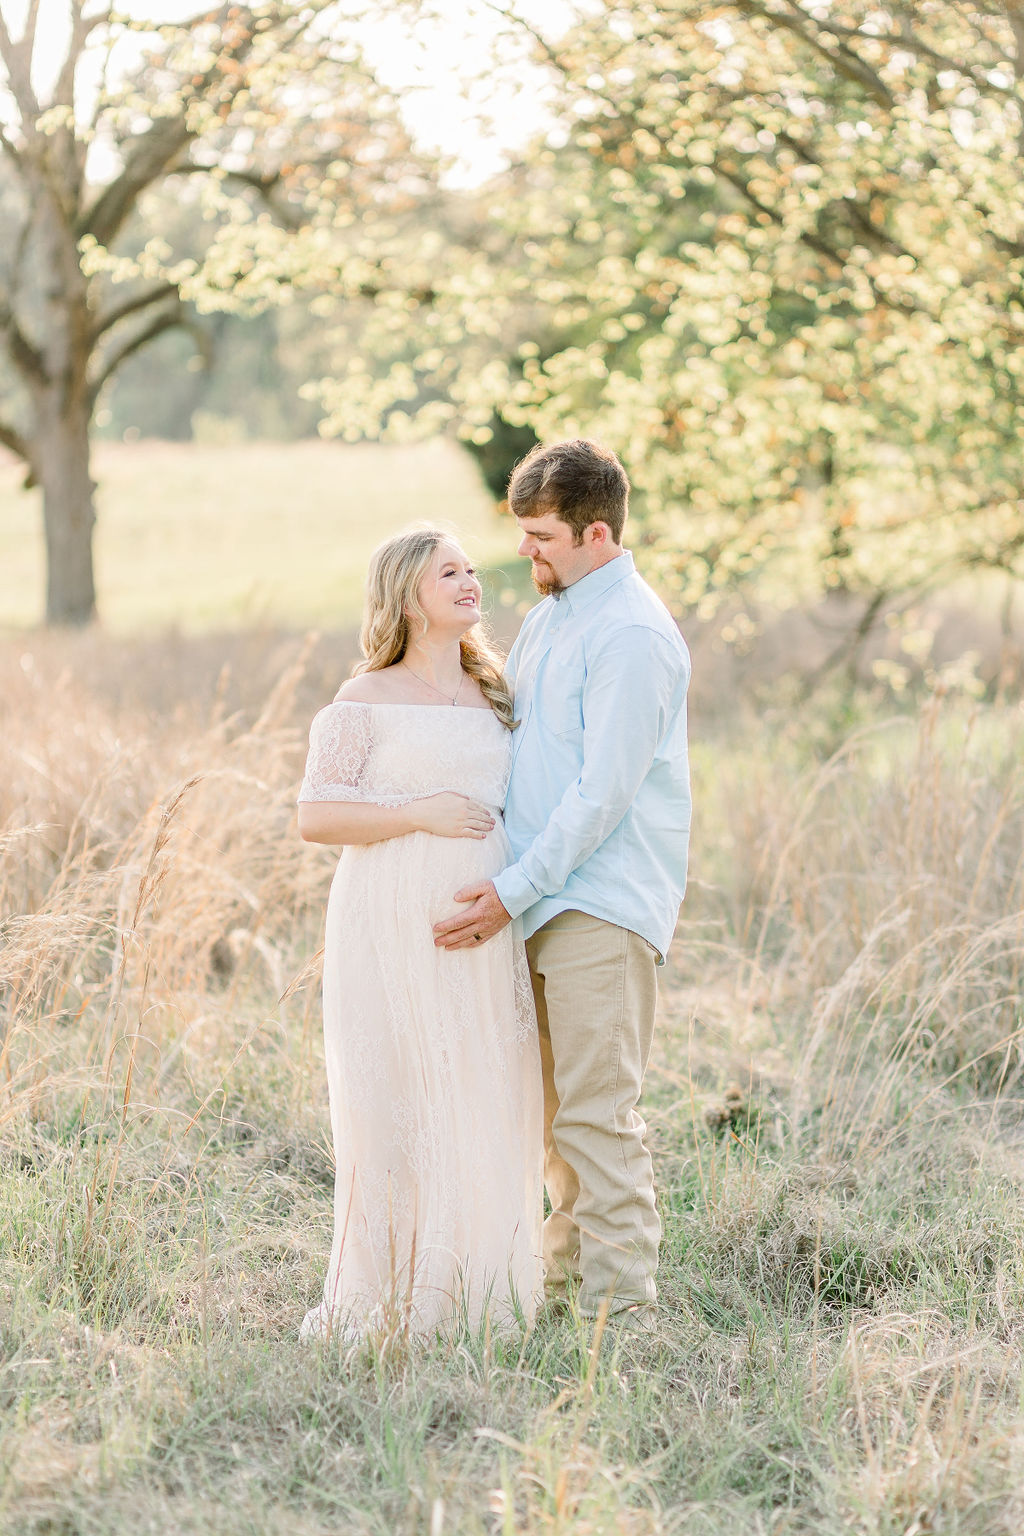 Mom and dad to be smiling at each other in green field with beautiful back lighting. Image captured by Madison Maternity Photographer.